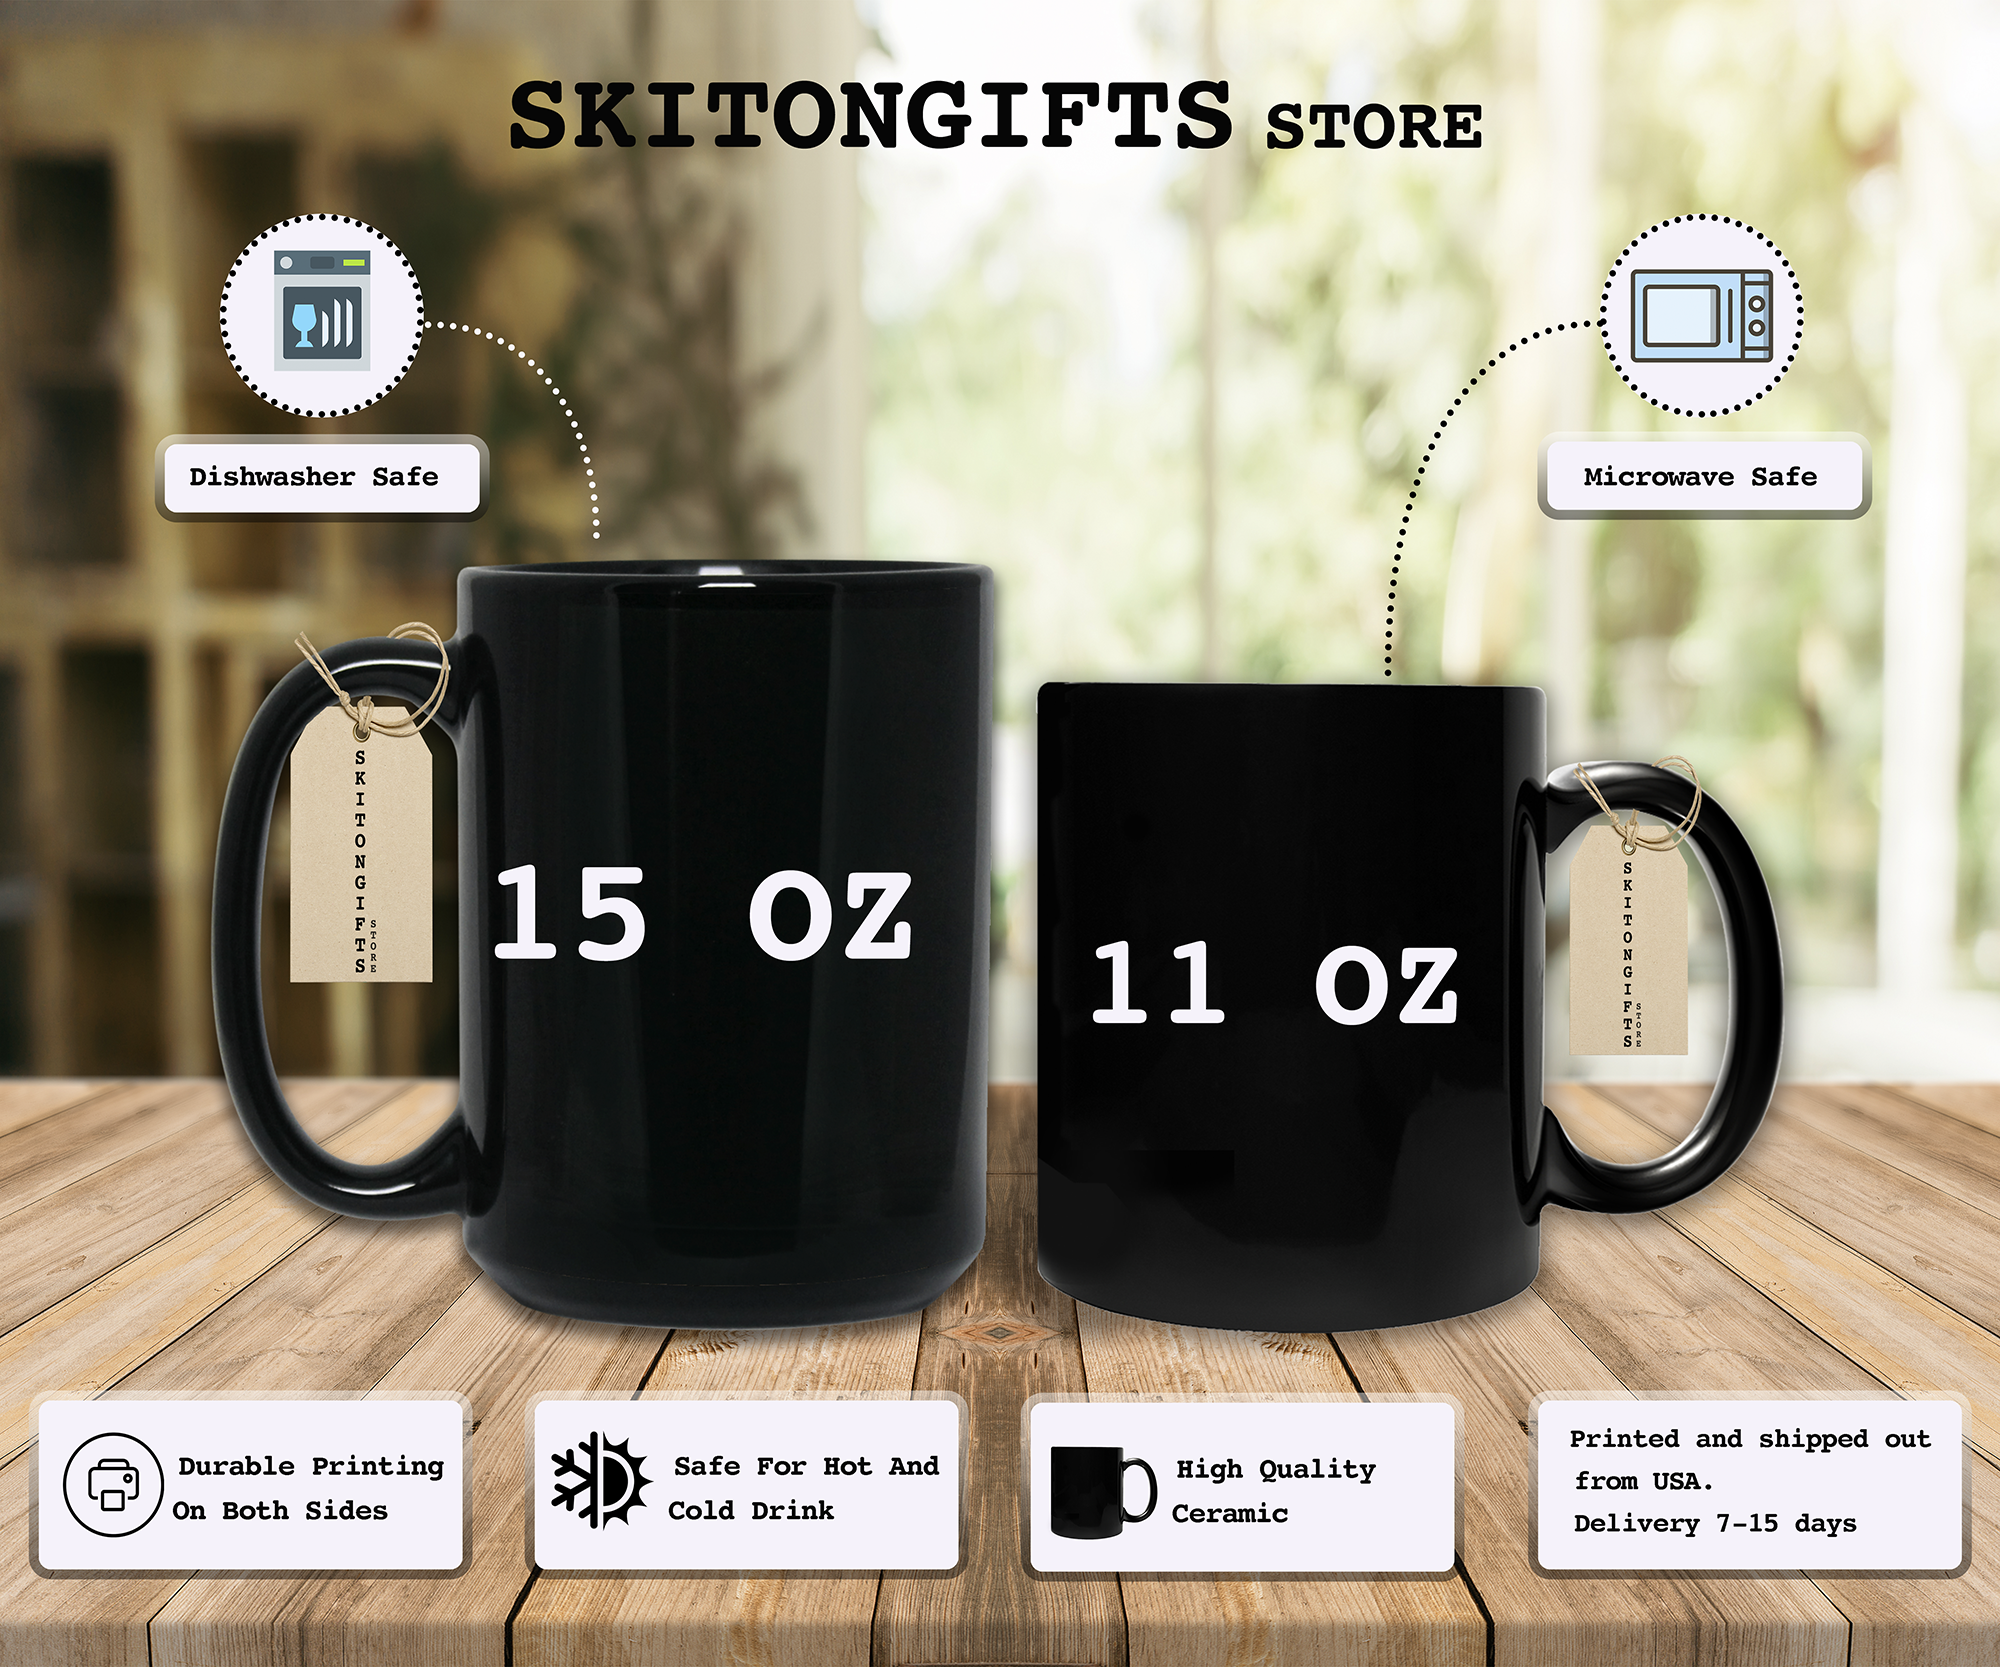 Skitongifts Funny Ceramic Coffee Mug For Birthday, Mother's Day, Father's Day, Christmas NH211221-Boozer, User & Loser 9Et3Lc6